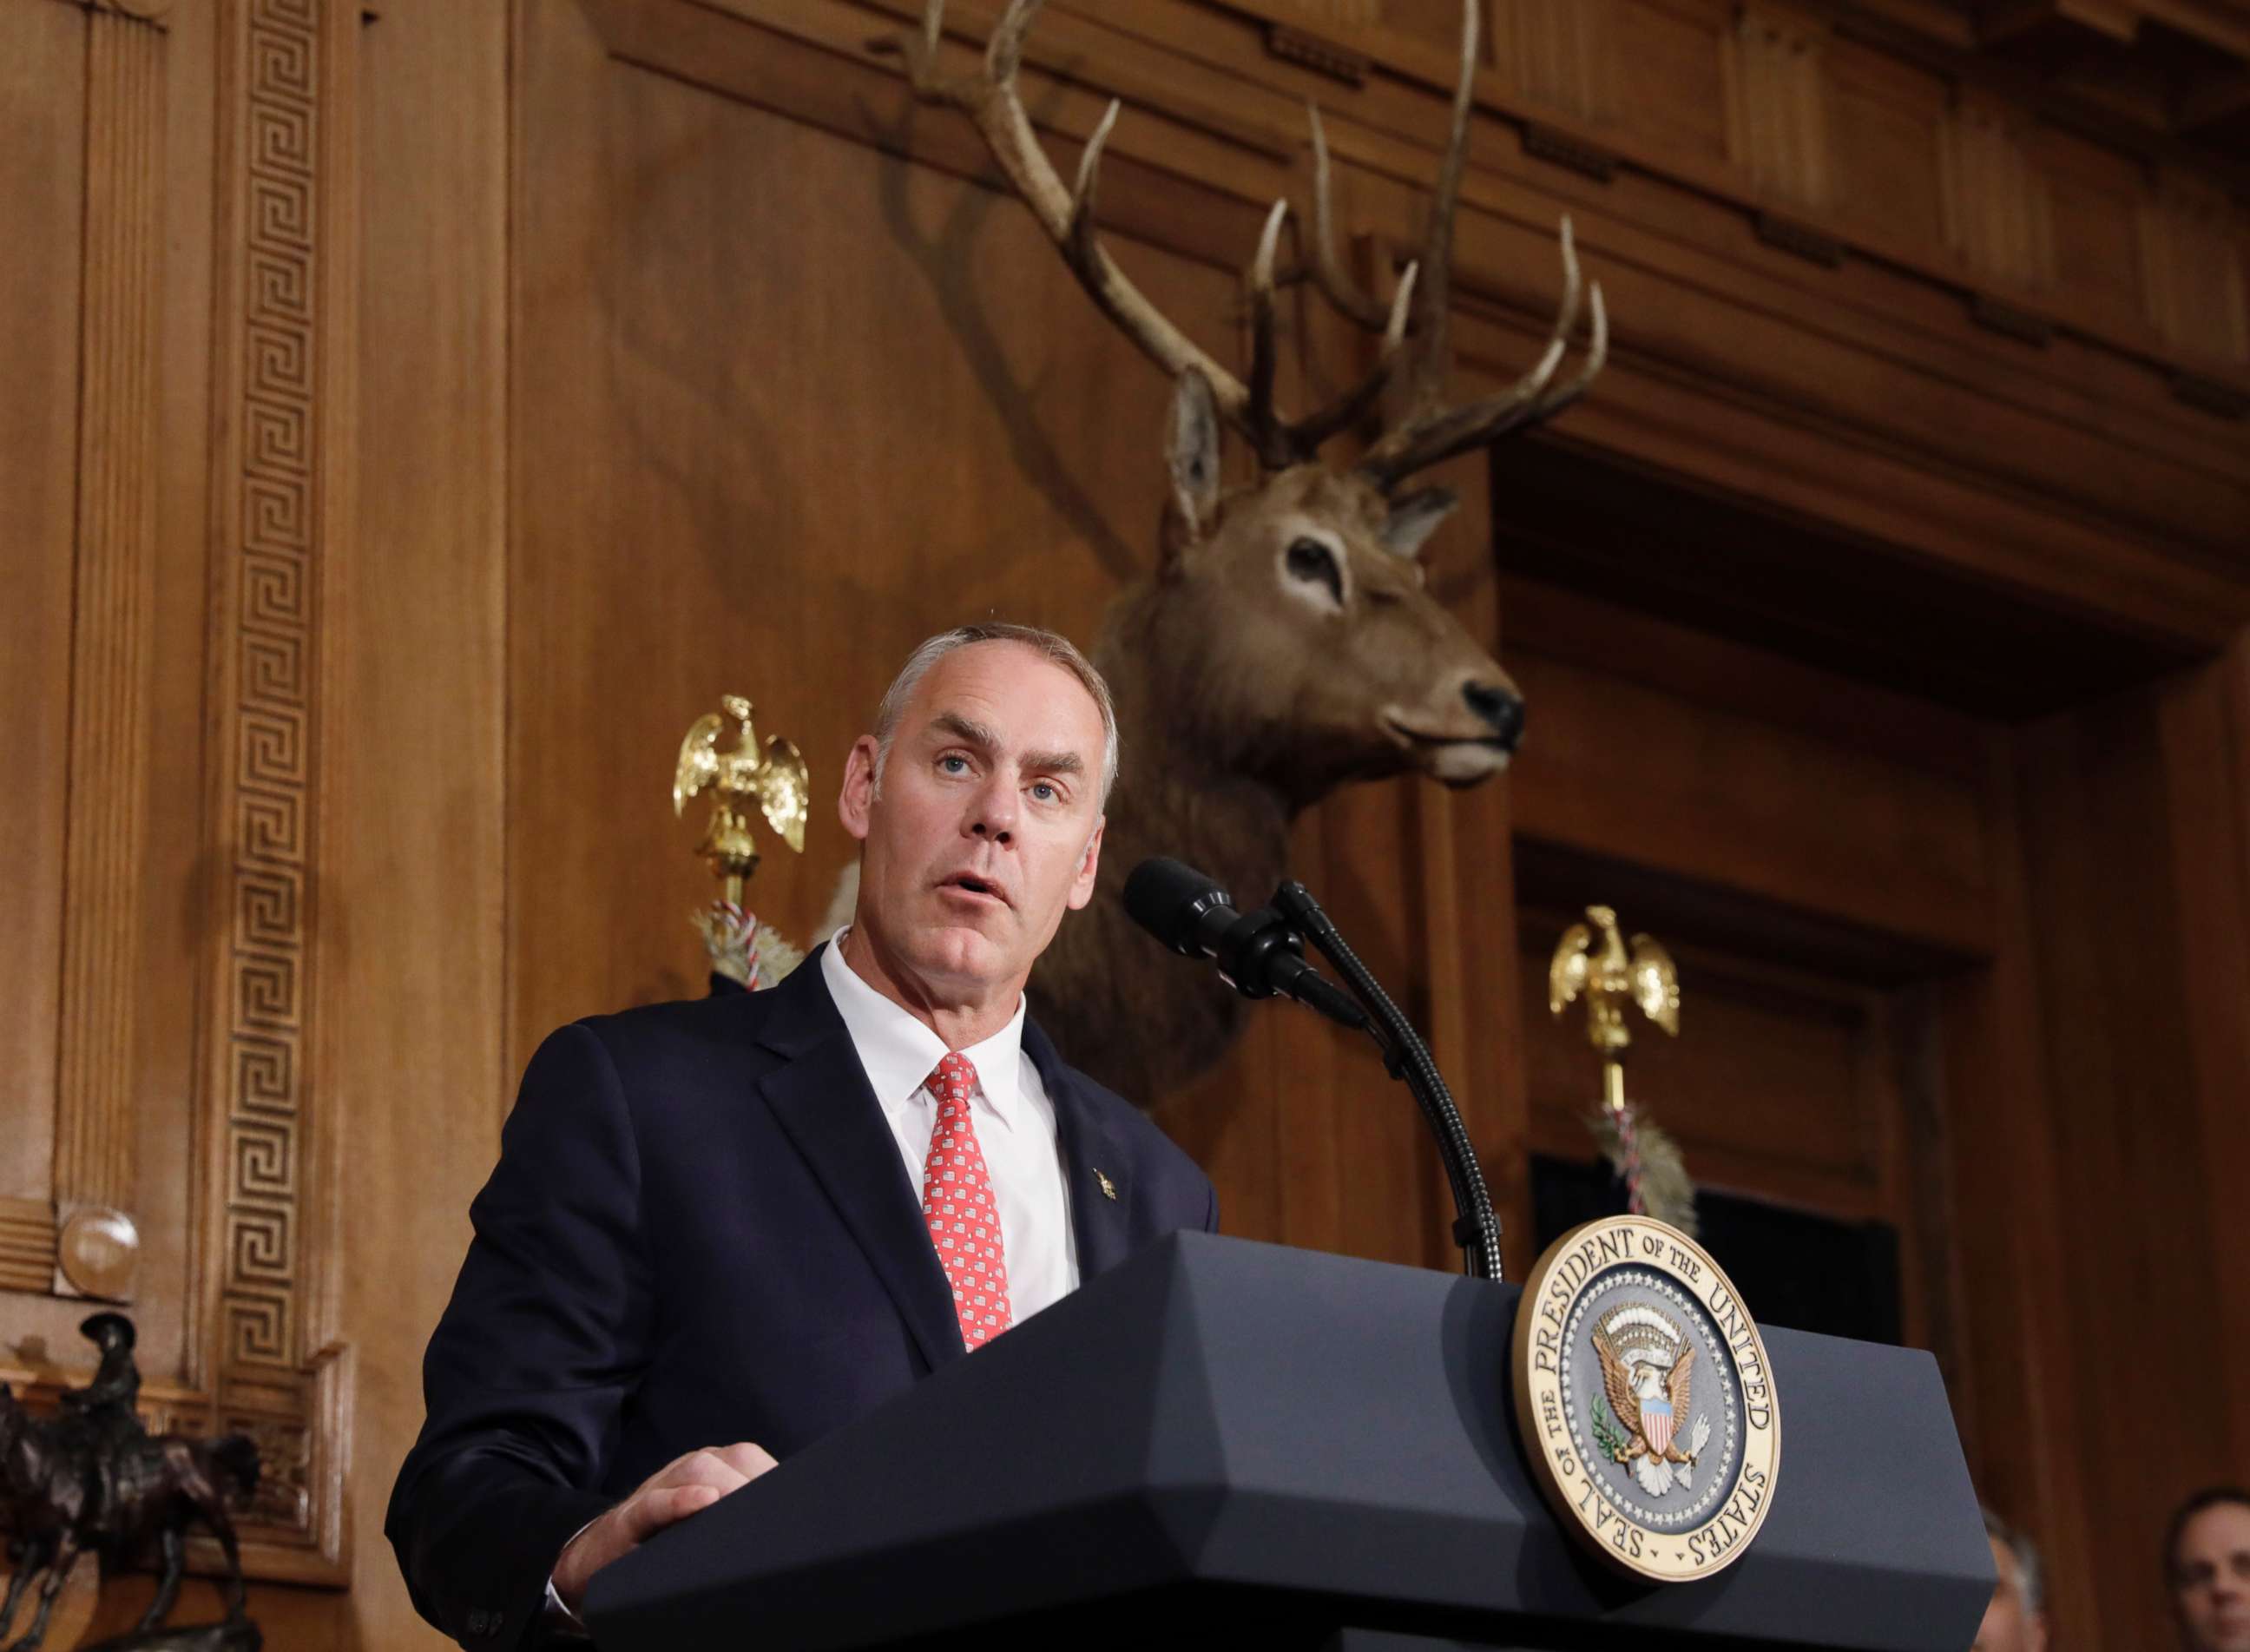 PHOTO: Interior Secretary Ryan Zinke speaks prior to President Donald Trump signing an executive order reviewing previous National Monument designations made under the Antiquities Act, at the Interior Department in Washington, April 26, 2017.